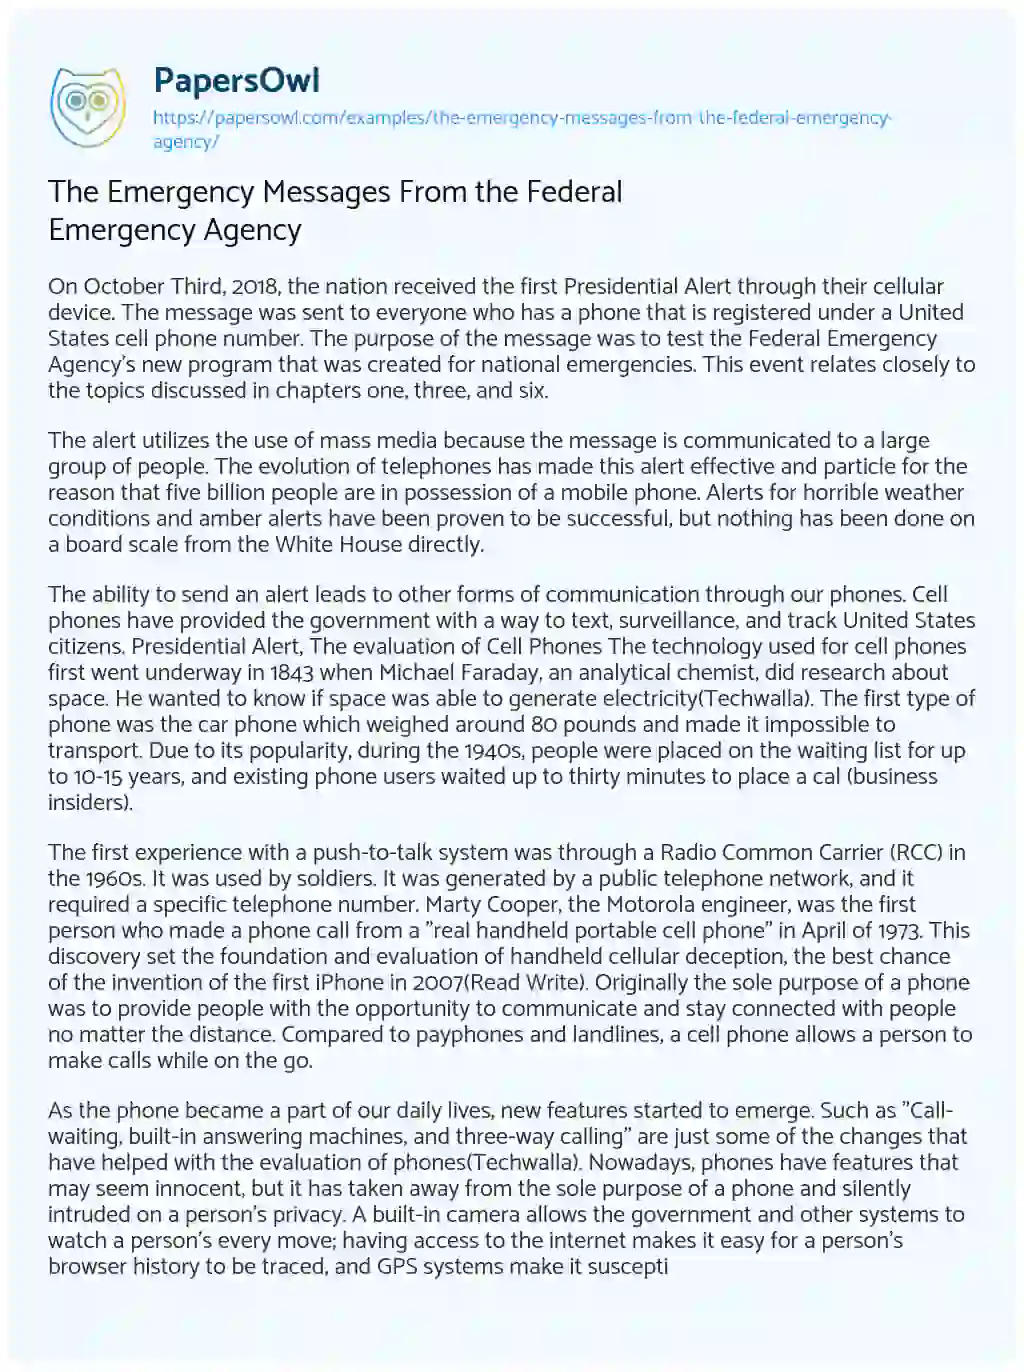 Essay on The Emergency Messages from the Federal Emergency Agency